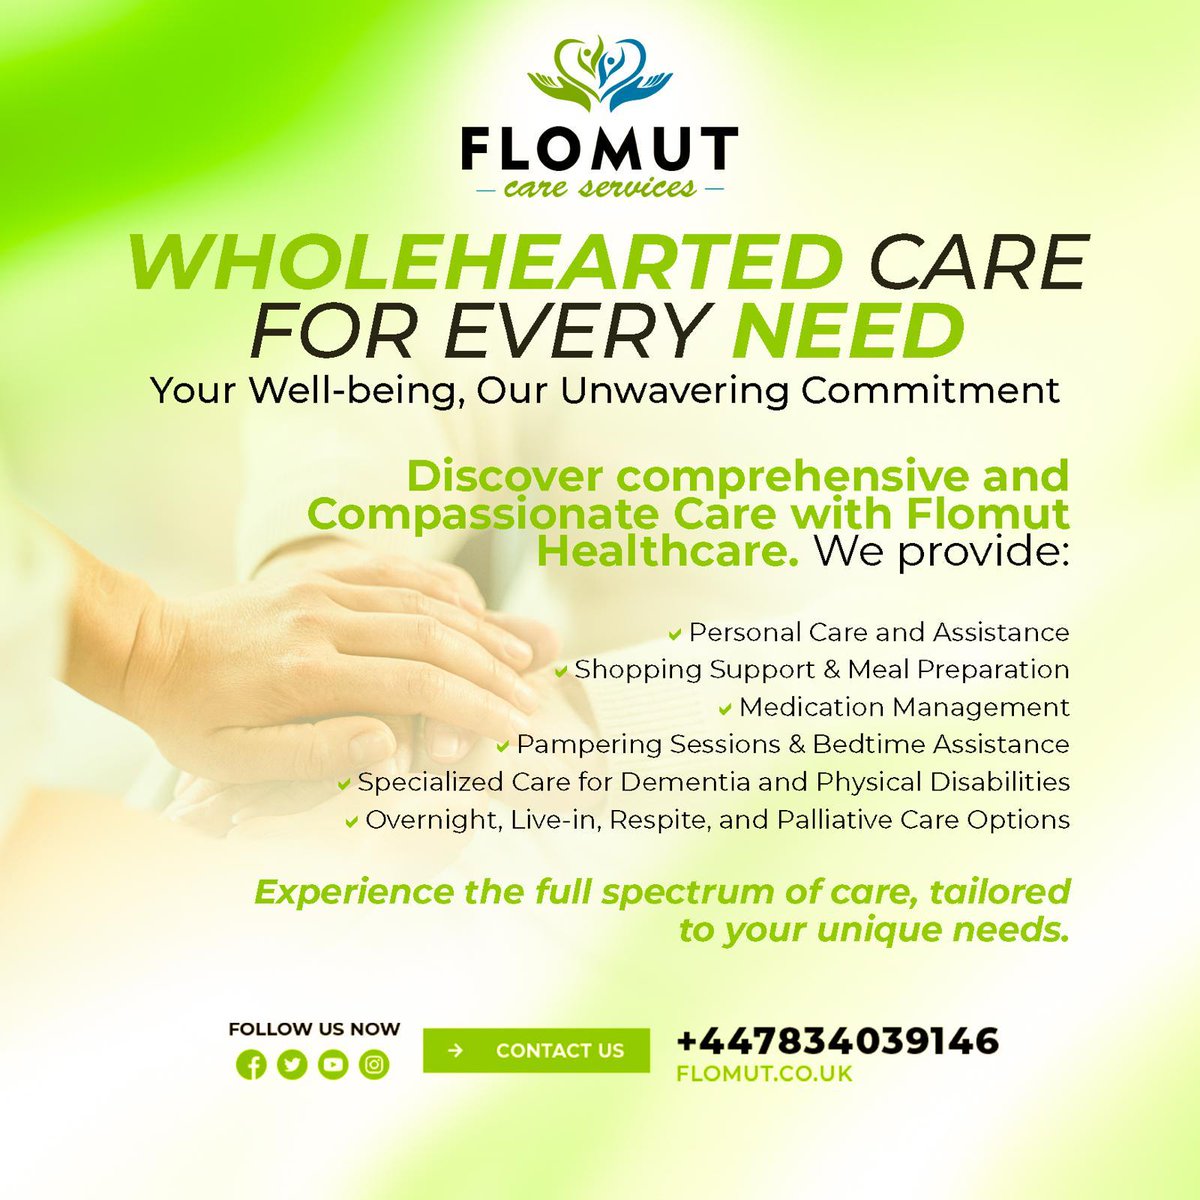 Experience the warmth and exceptional support of Flomut Healthcare. Specializing in compassionate care for those with dementia and physical disabilities, we're here to brighten and ease your daily life.